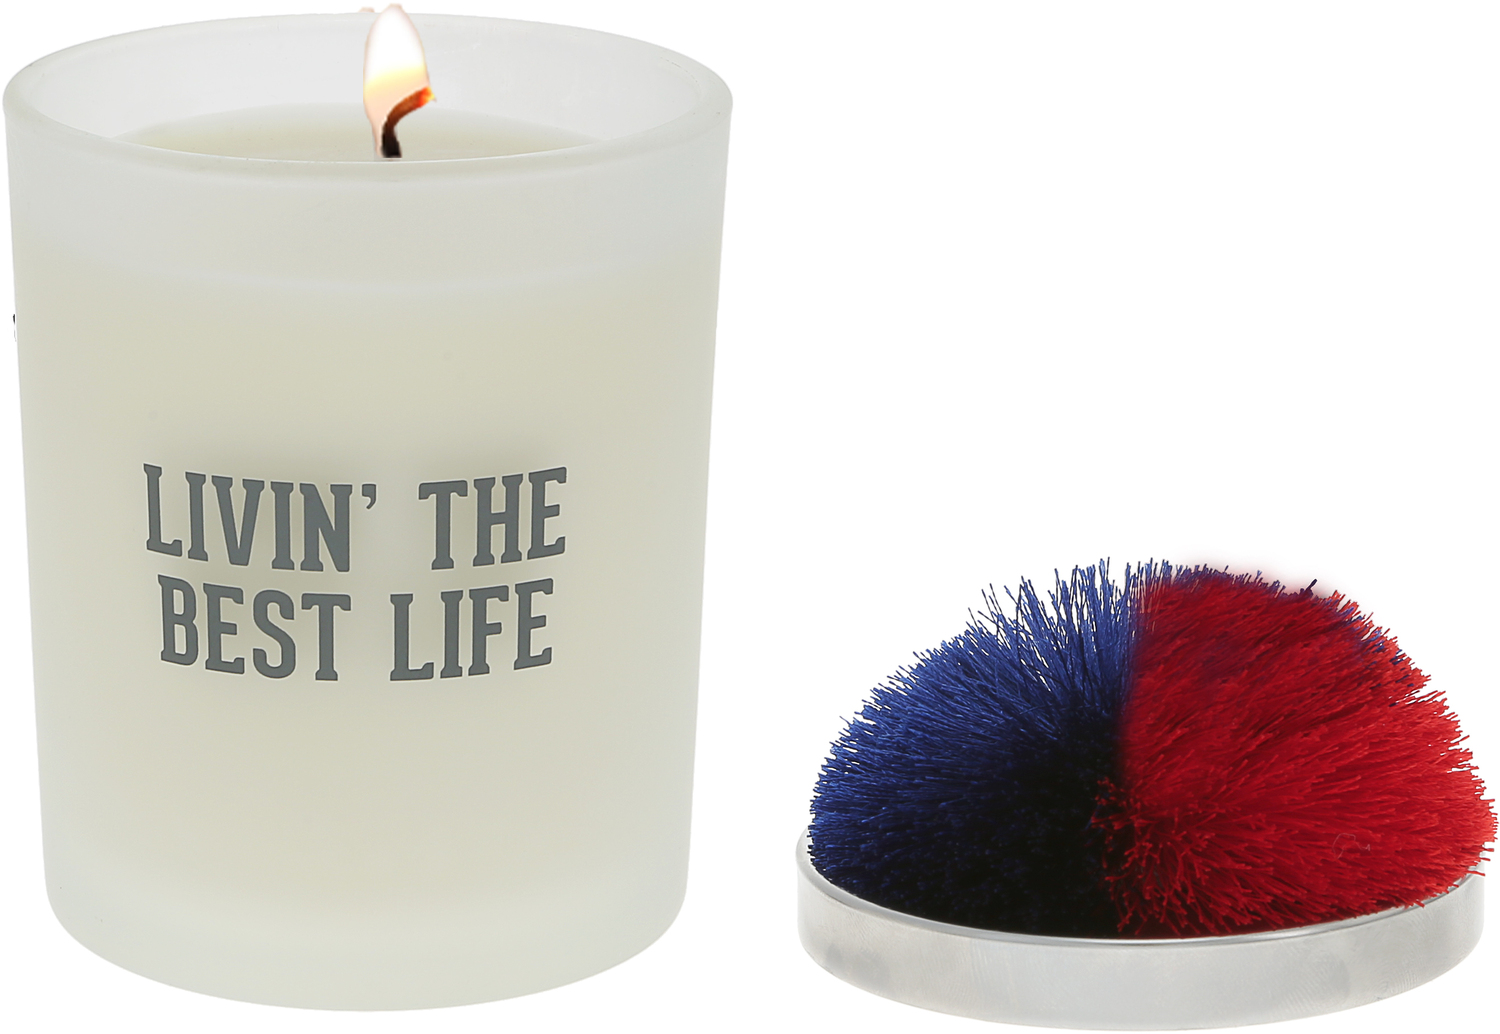 Best Life - Red & Blue by Repre-Scent - Best Life - Red & Blue - 5.5 oz - 100% Soy Wax Candle with Pom Pom Lid
Scent: Tranquility